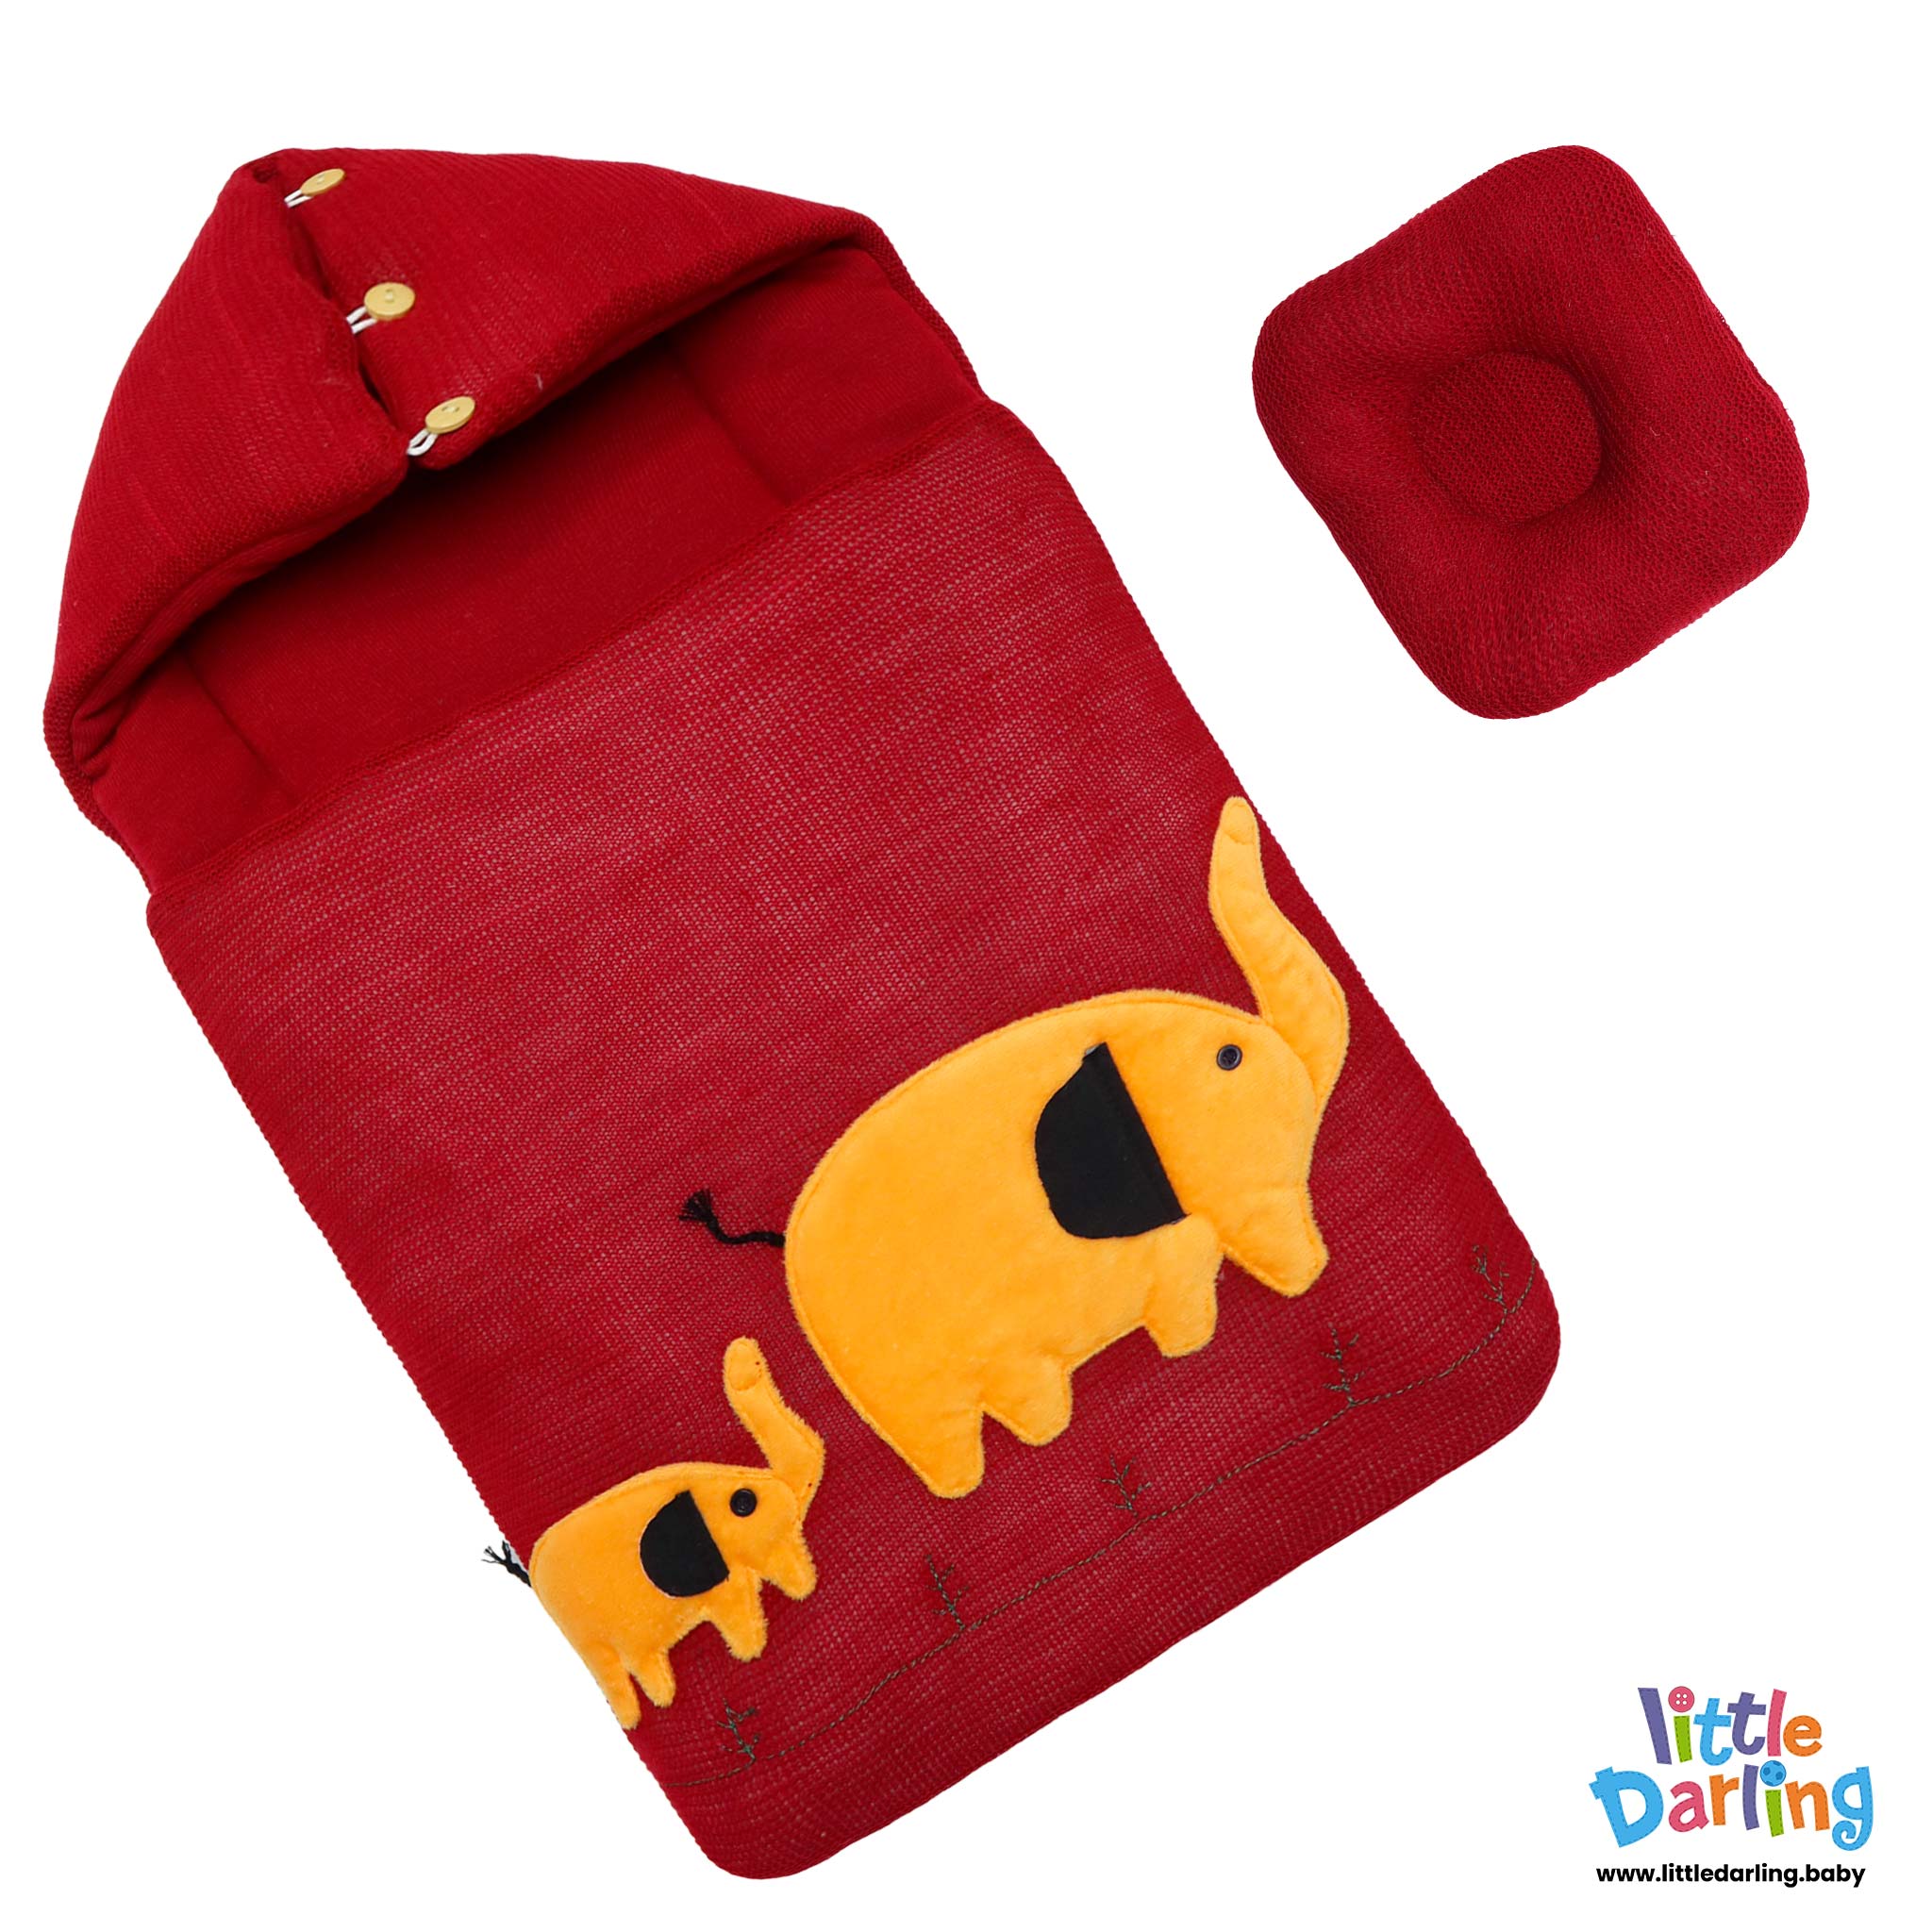 Baby Carry Nest Hooded With Pillow Elephant Embossed Red Color by Little Darling